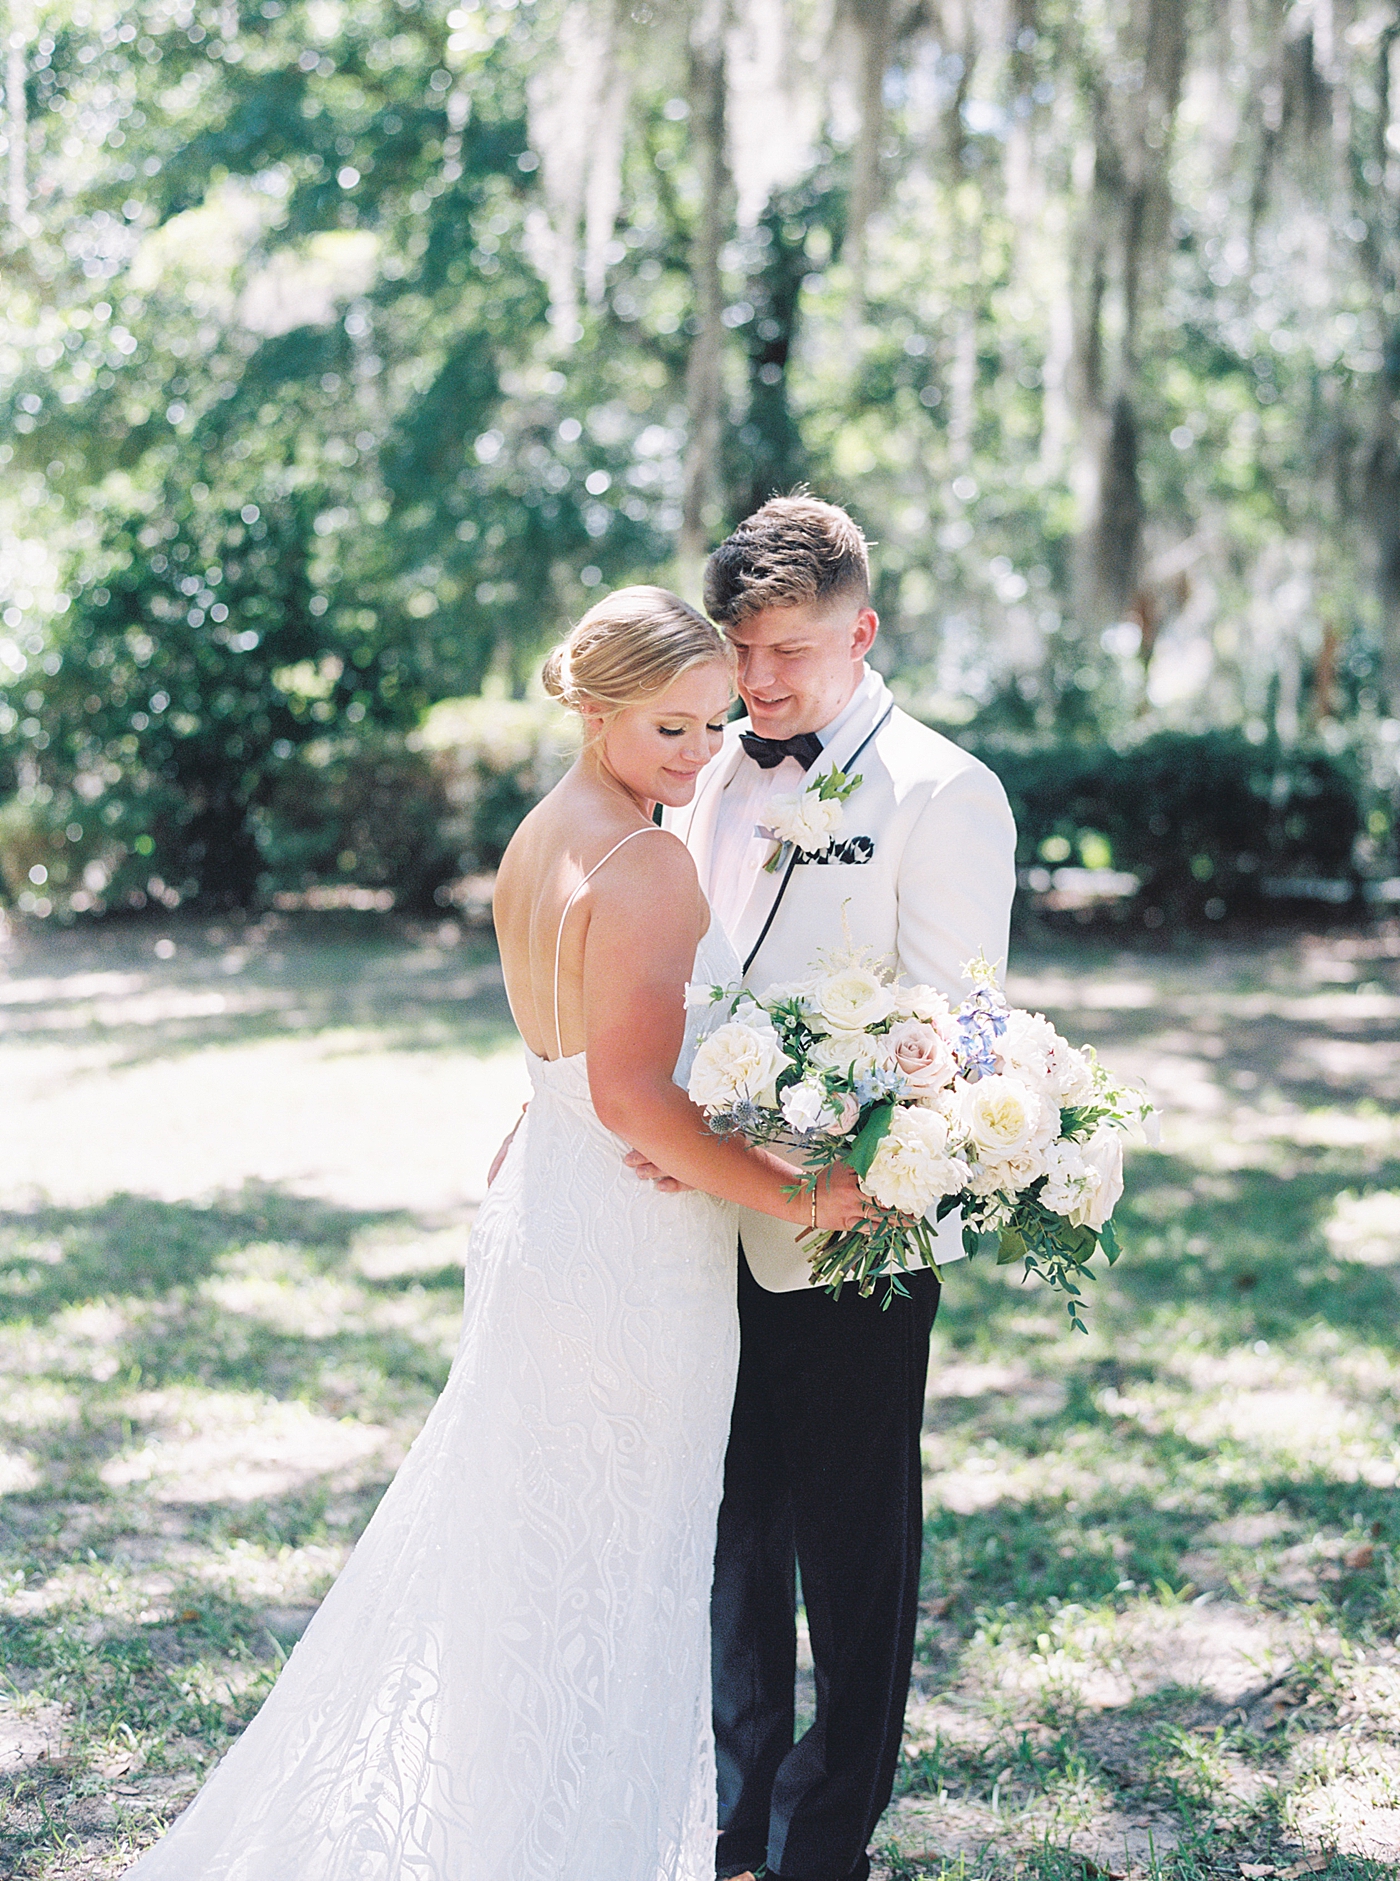 Bride and groom portraits | Images by Annie Laura Photography